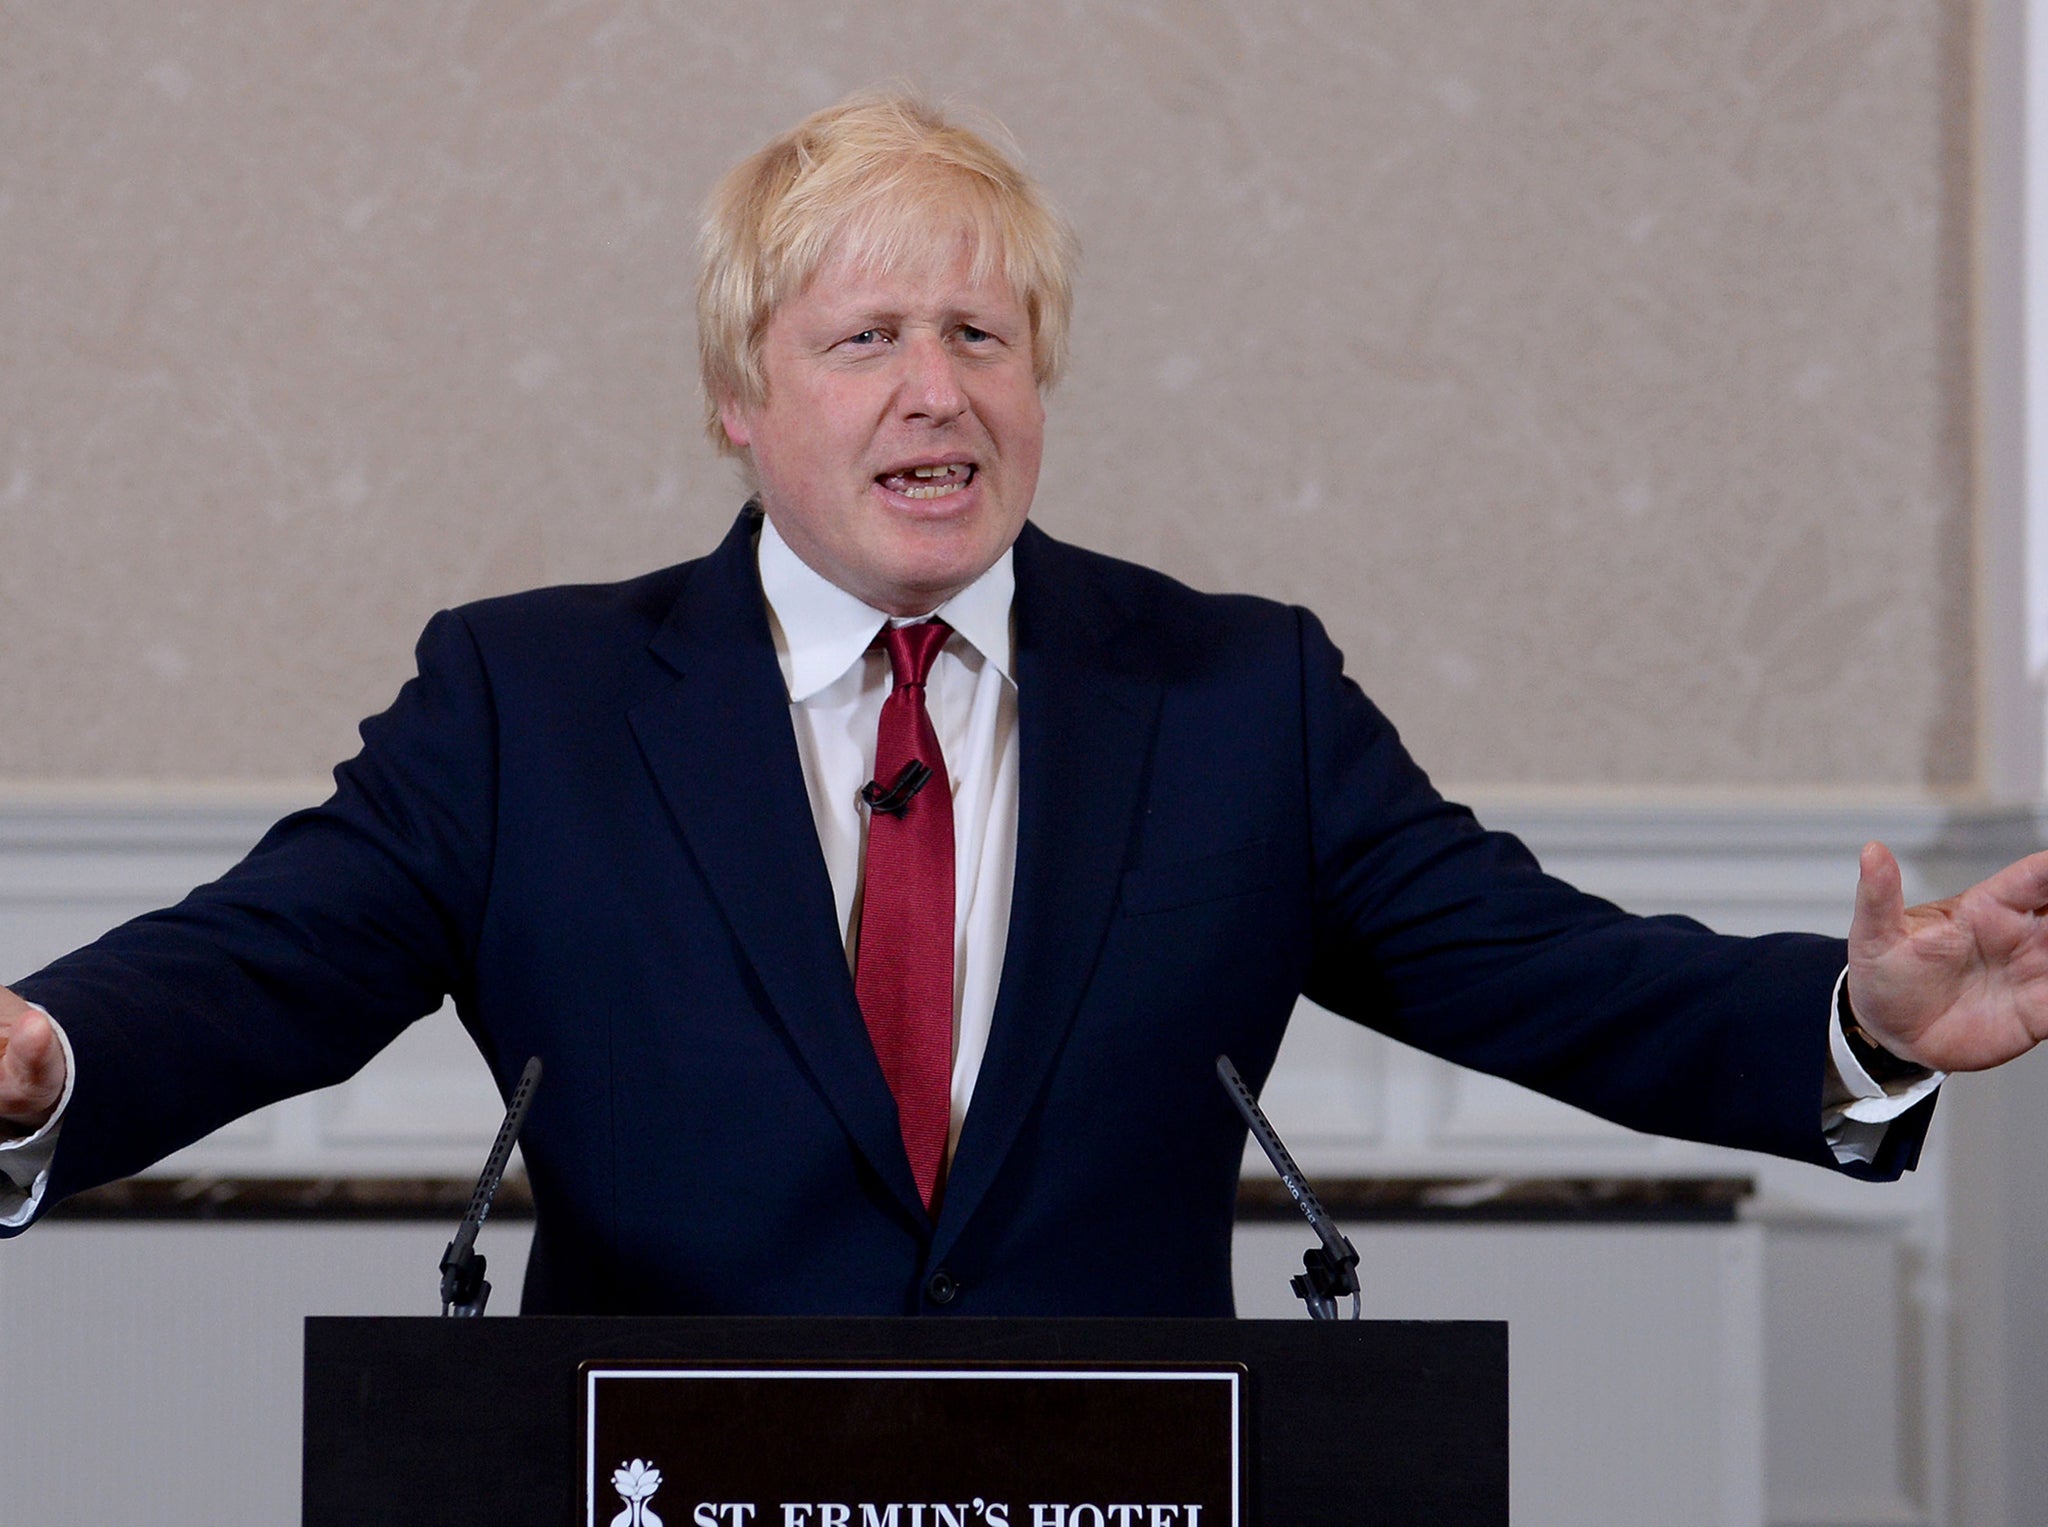 Boris Johnson speaks during a press conference where he formally announced that he will not enter the race to succeed David Cameron in Downing Street.